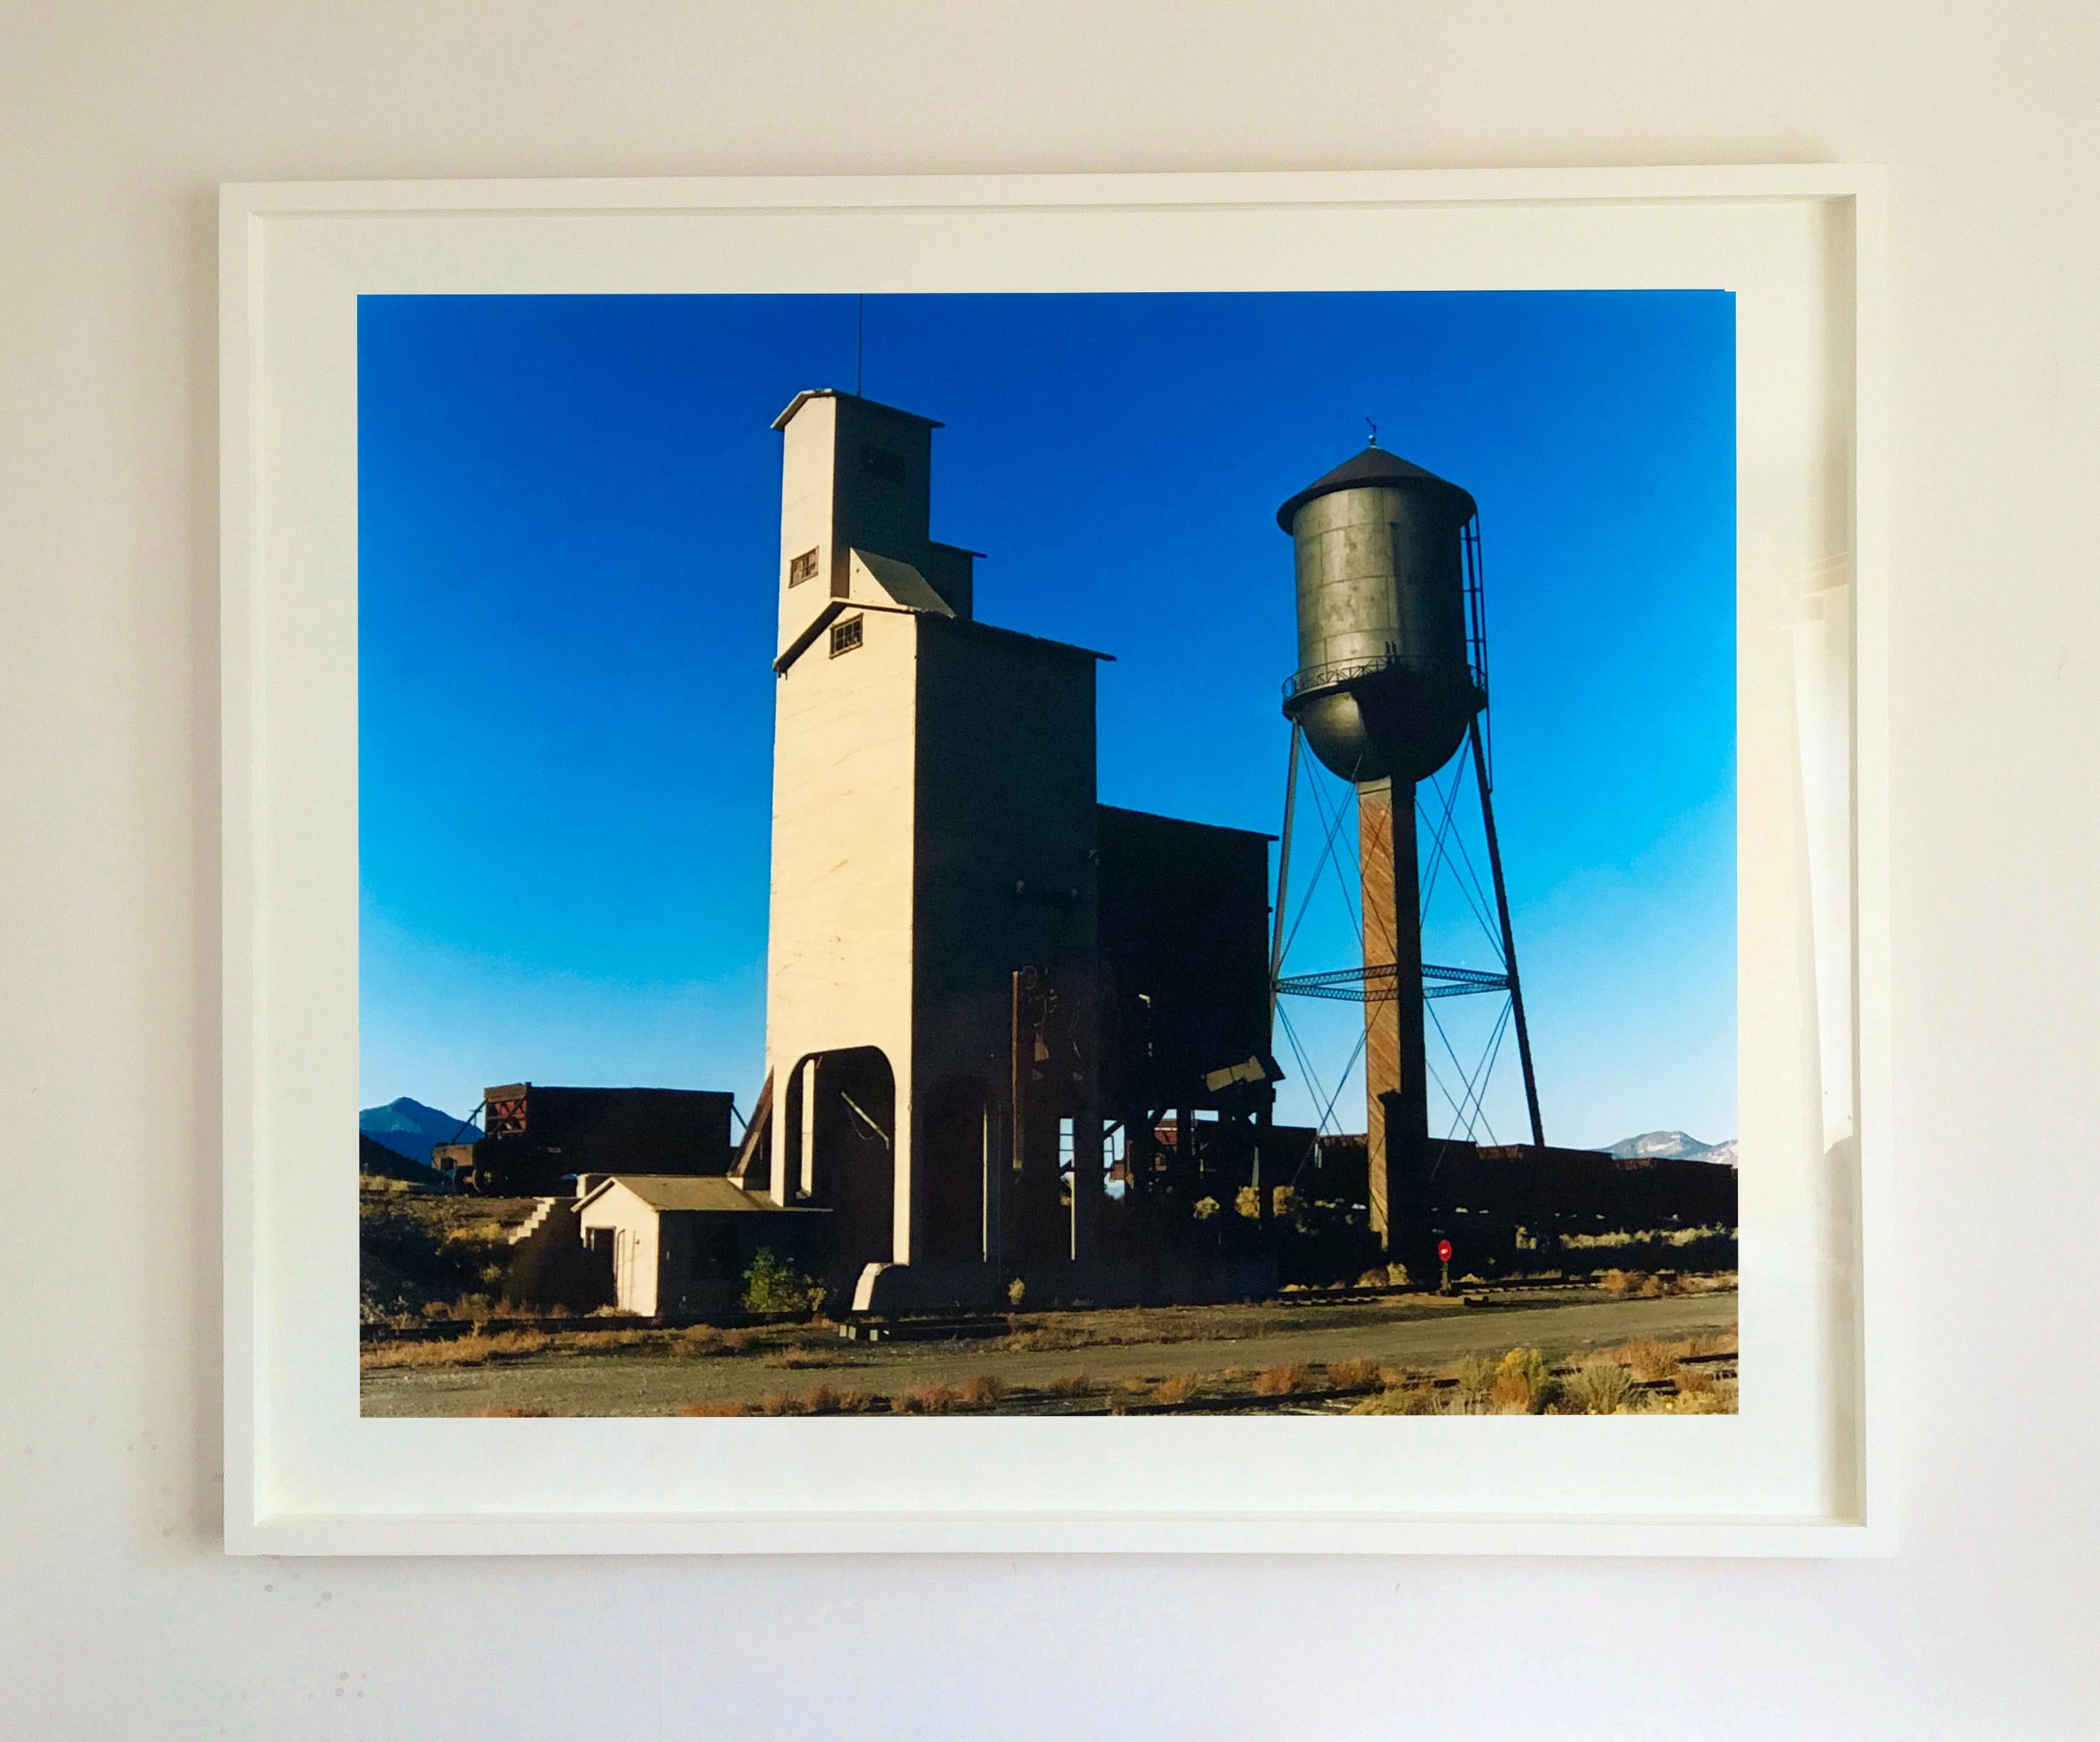 'Railroad Depot', from Richard Heeps series taking its title from Neil Young's song 'After the Gold Rush'. It captures former American Mining Towns he visited on his journey from Las Vegas to Bonneville. Stopping in Wendover, Utah, he created